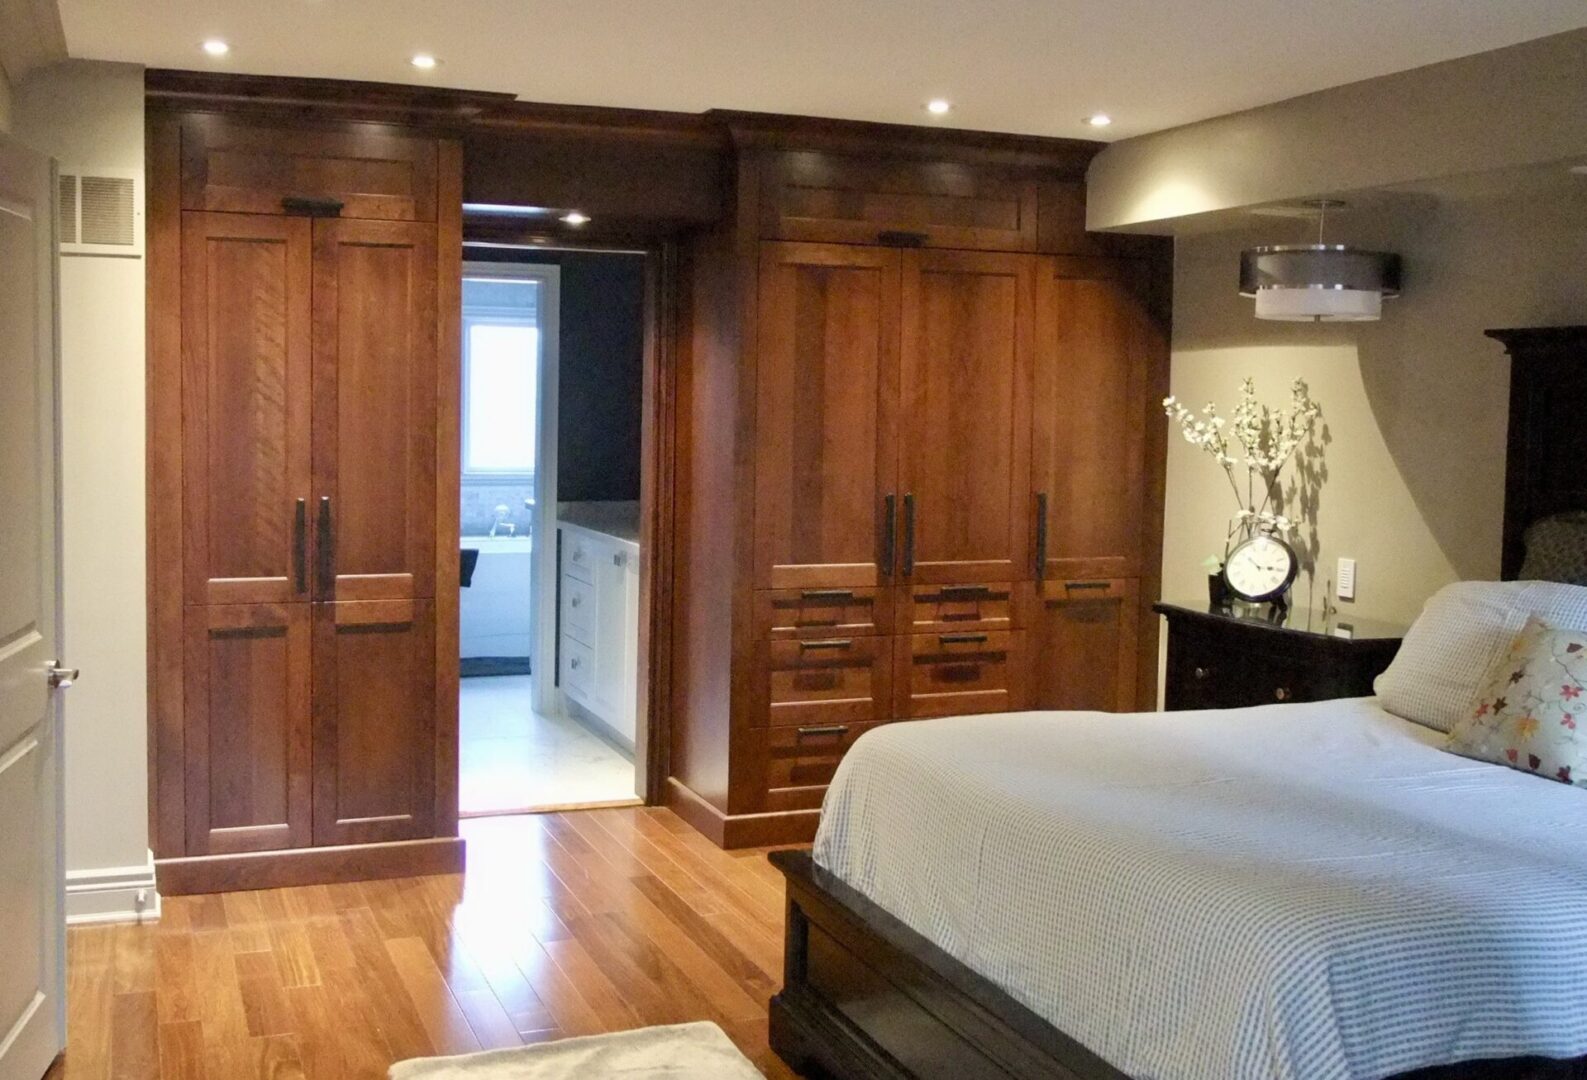 Main bedroom with custom armoire units